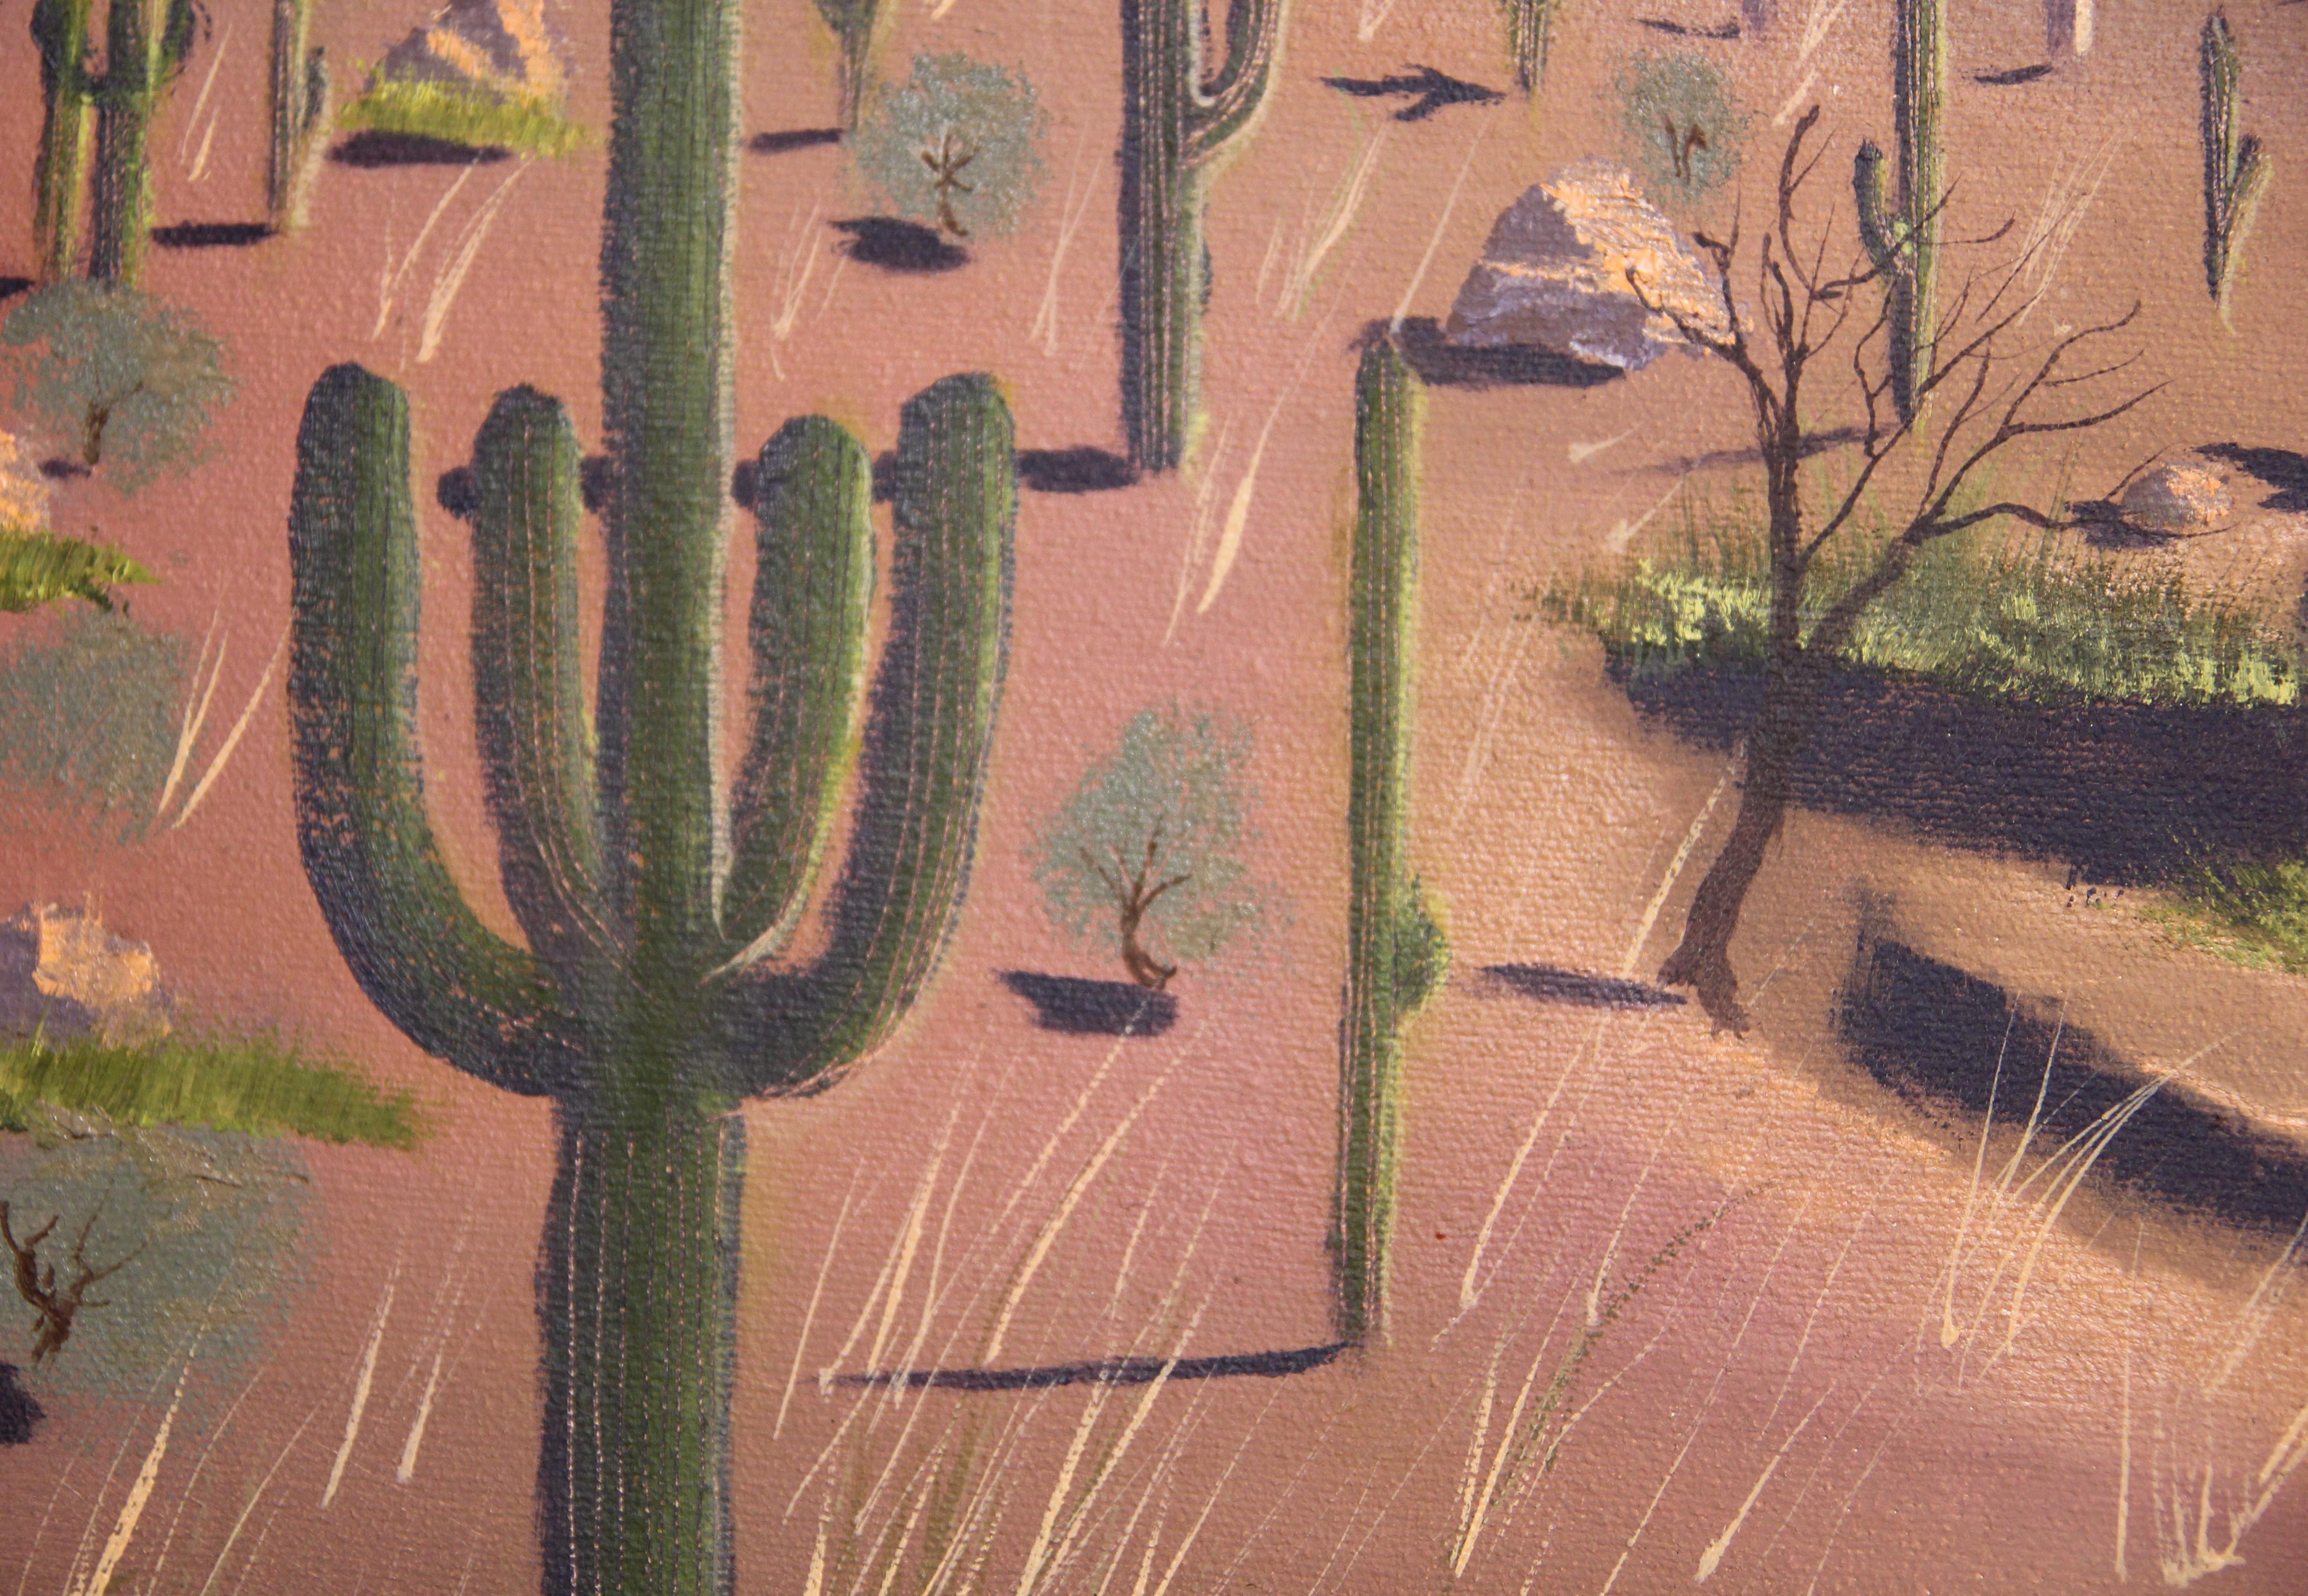 Abstract Pink and Purple Desert Landscape with Cacti and Animals Signed Thornton - Painting by Unknown